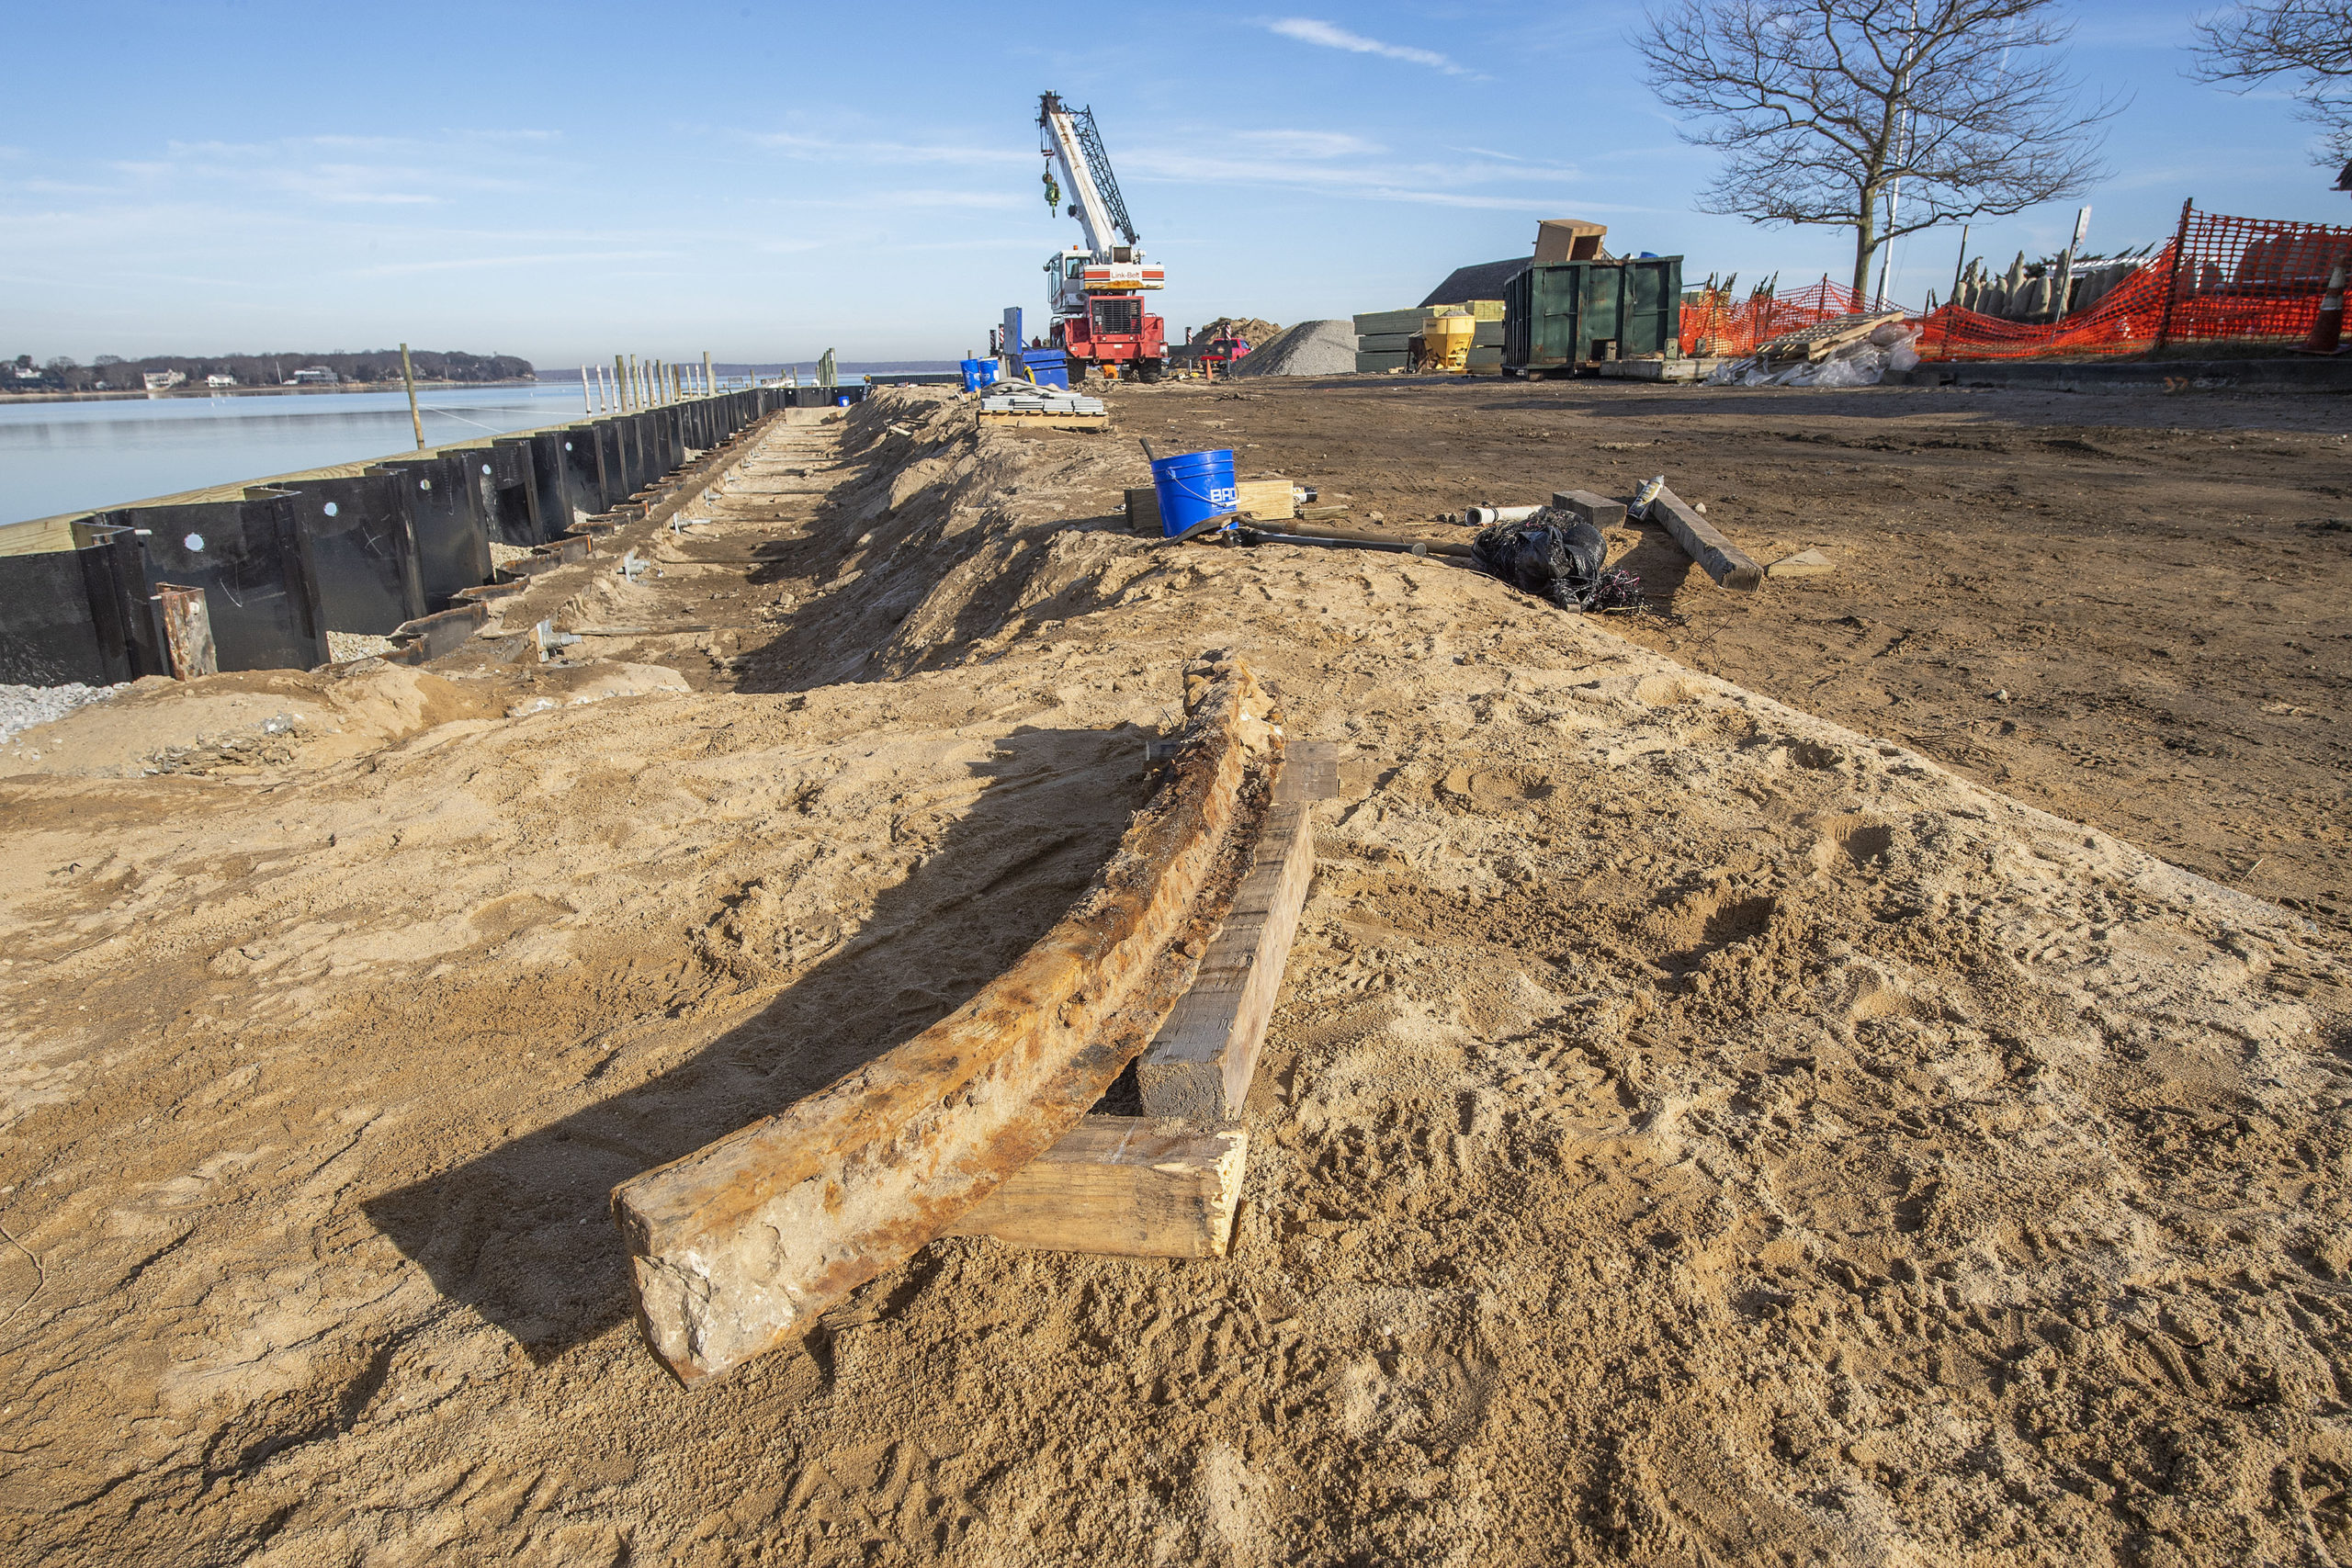 While excavating old material as process of renovating Long Wharf this past week, a crew from job contractors Chesterfield & Associates, Inc. unearthed a 58